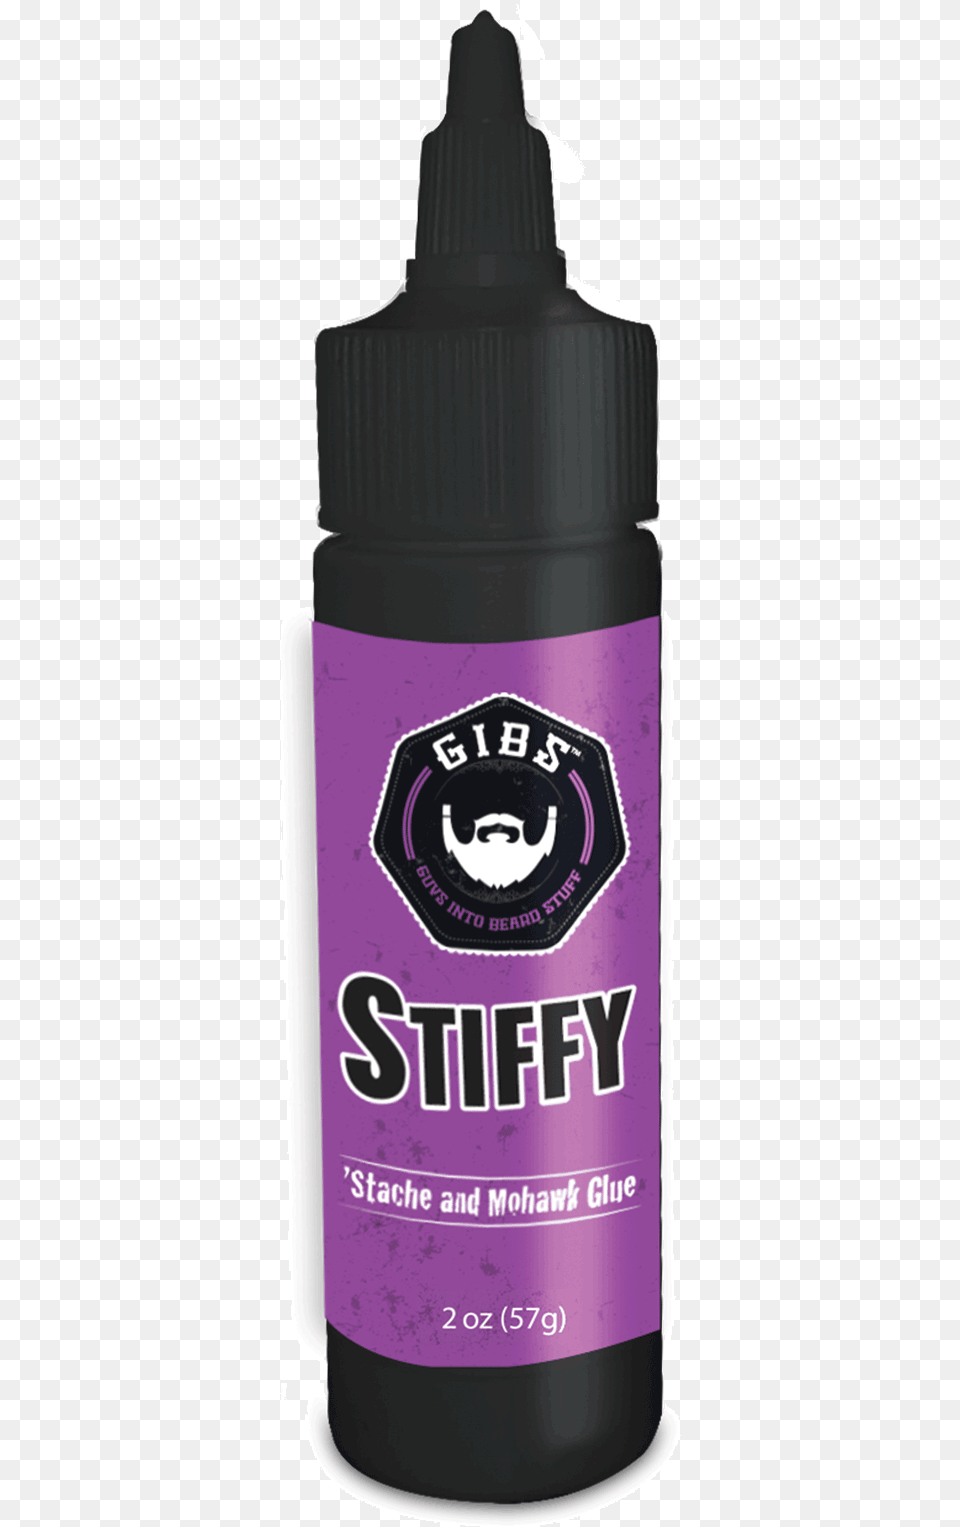 Stiffy Stache And Mohawk Glue Beard, Bottle, Alcohol, Beer, Beverage Png